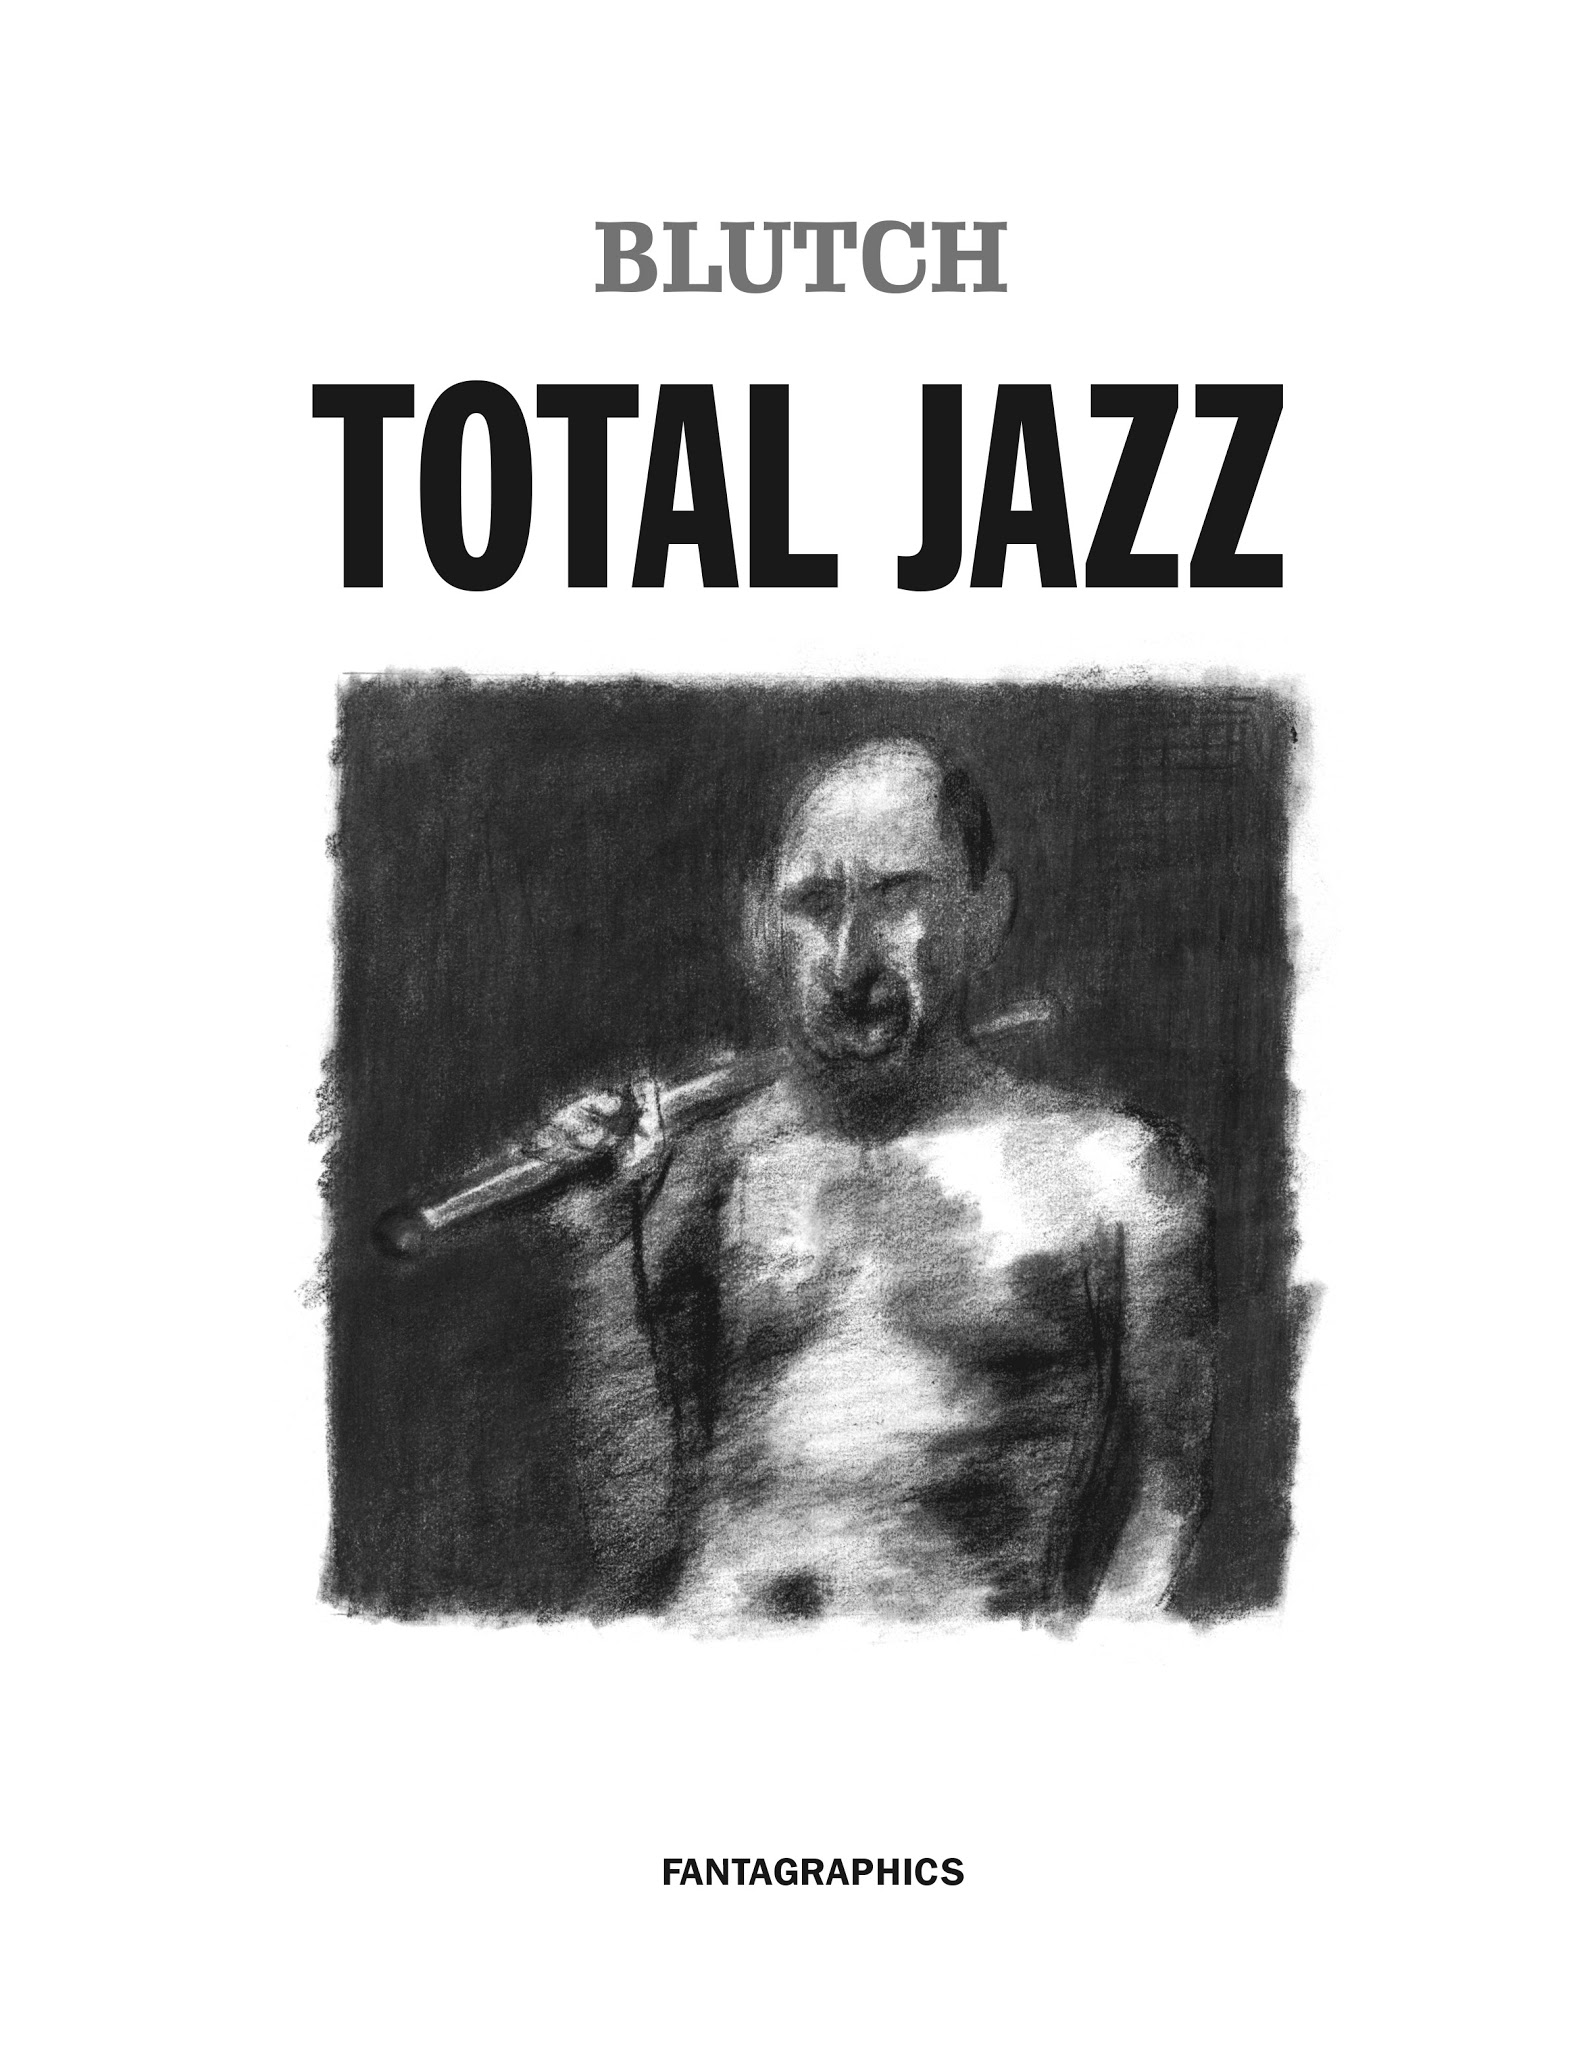 Read online Total Jazz comic -  Issue # TPB - 4